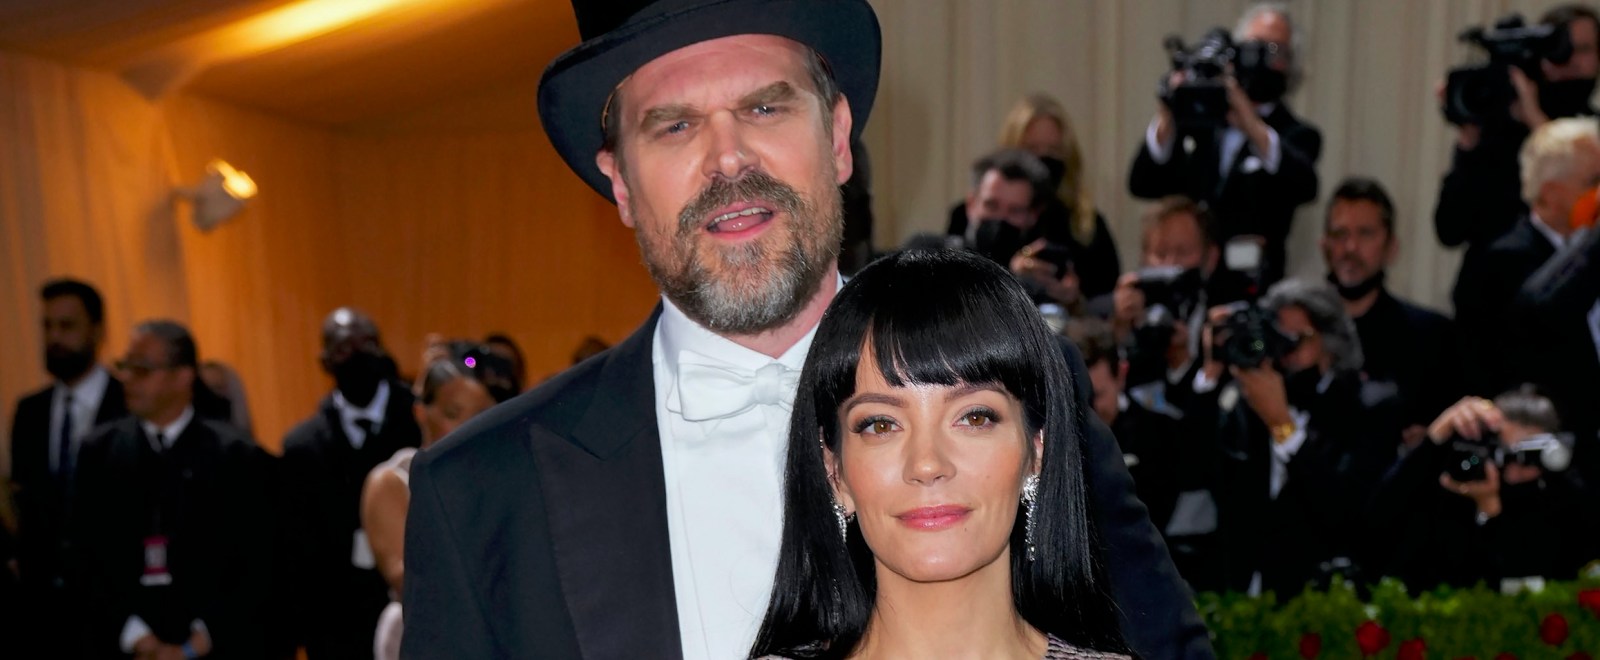 Lily Allen Turned To Google To Ask How Long She Should Wait Before Having Sex With David Harbour